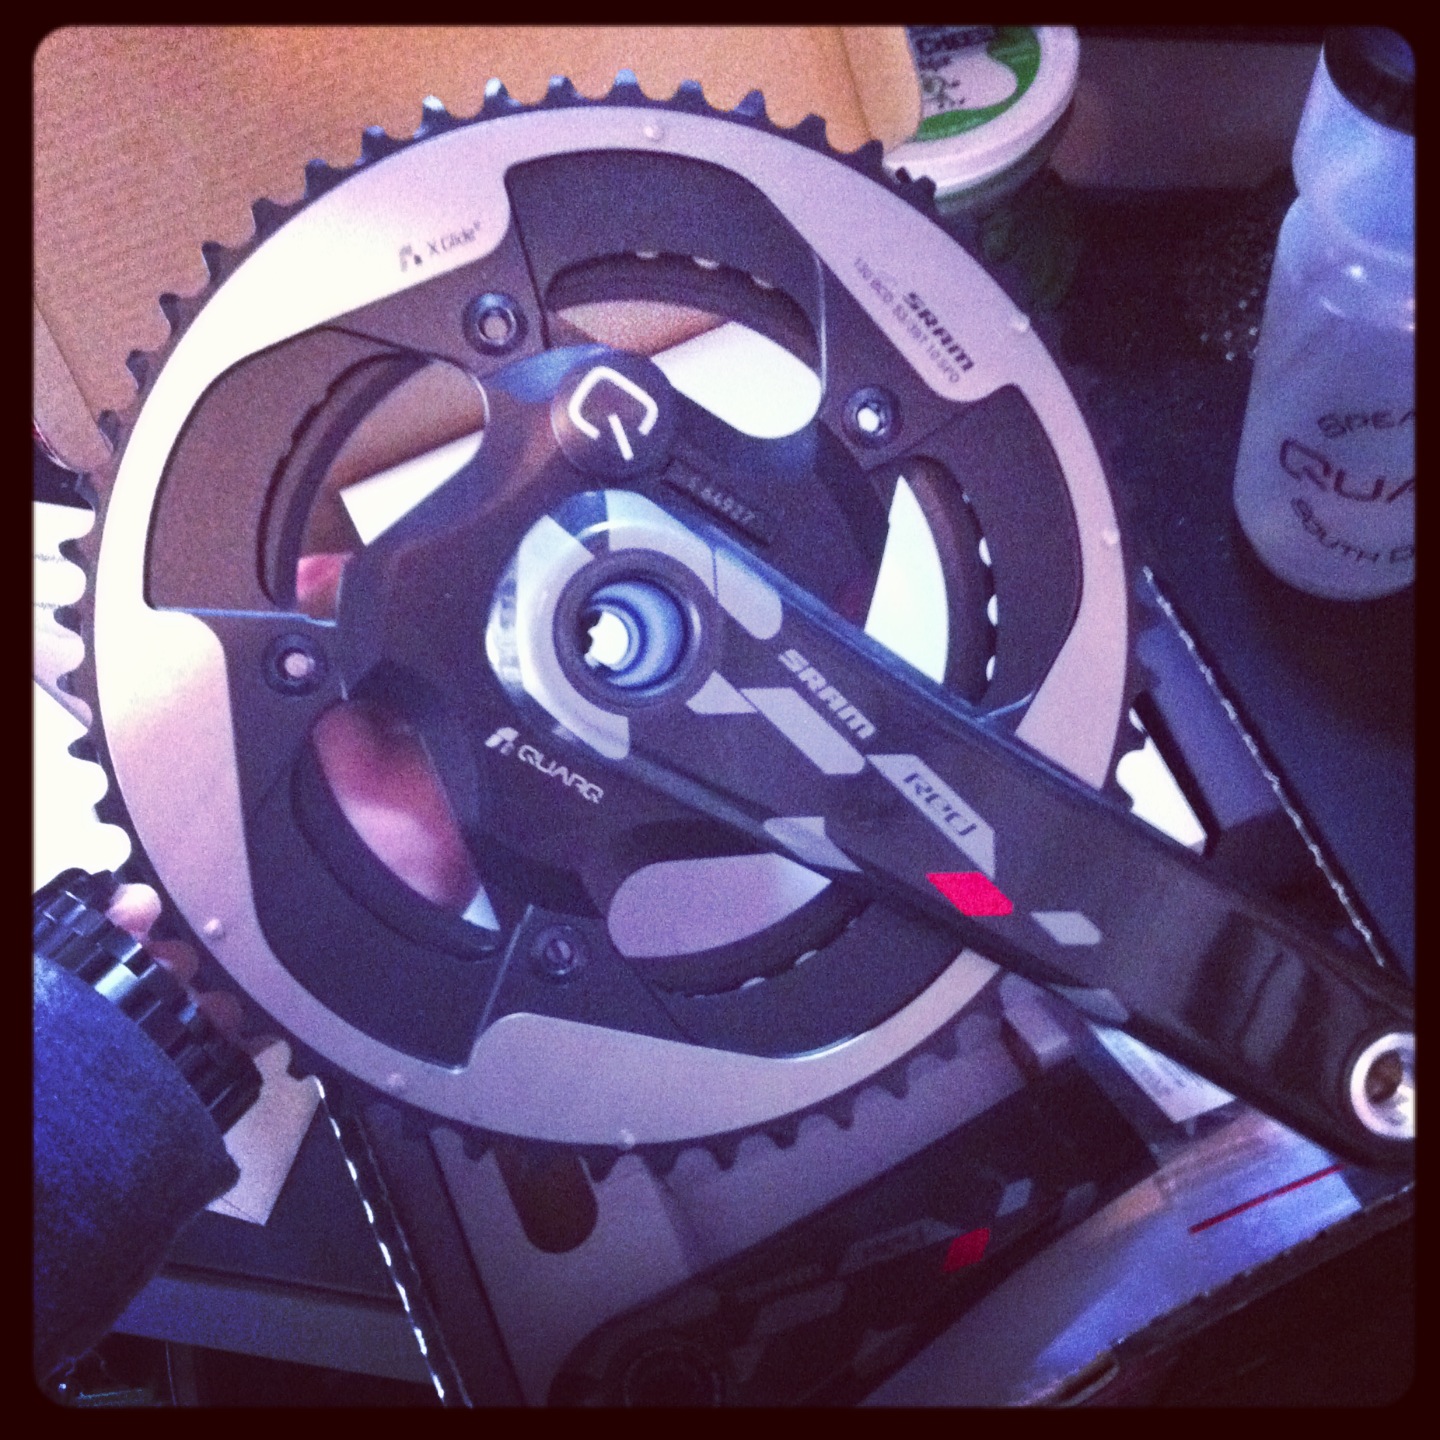 A Quarq power meter can help you set your functional threshold power value properly.